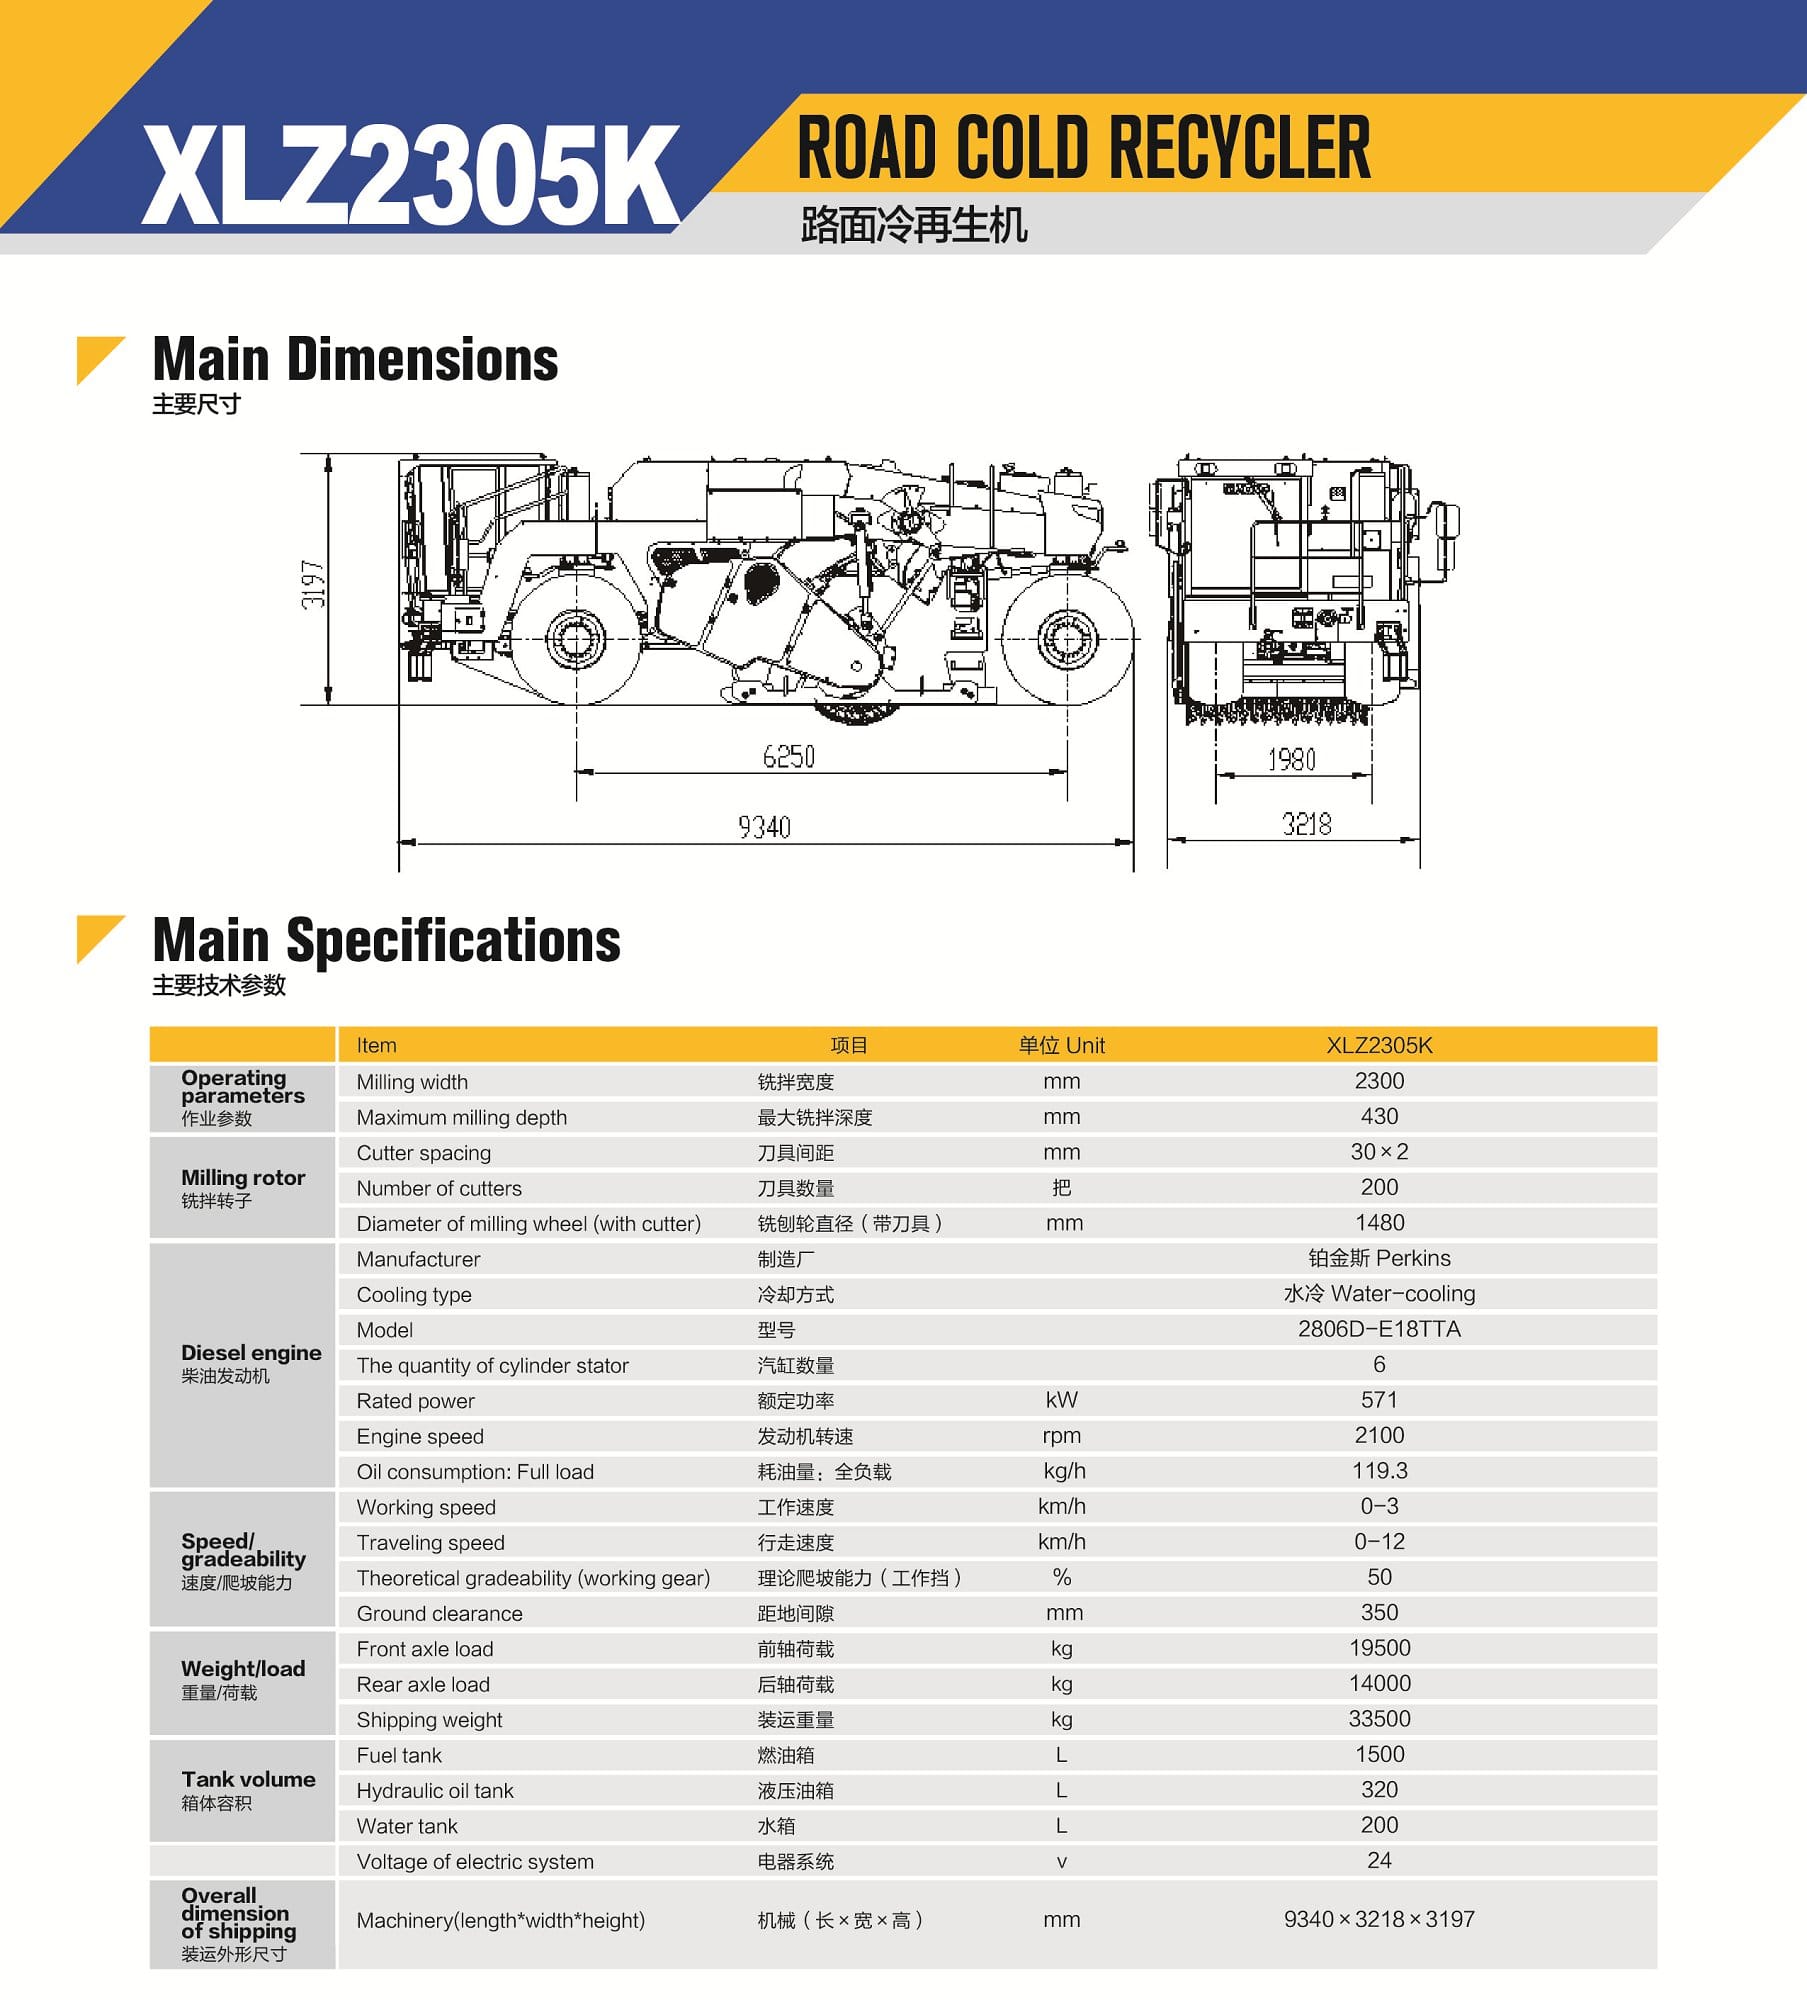 XCMG Official Road Cold Recycler XLZ2305K For Sale